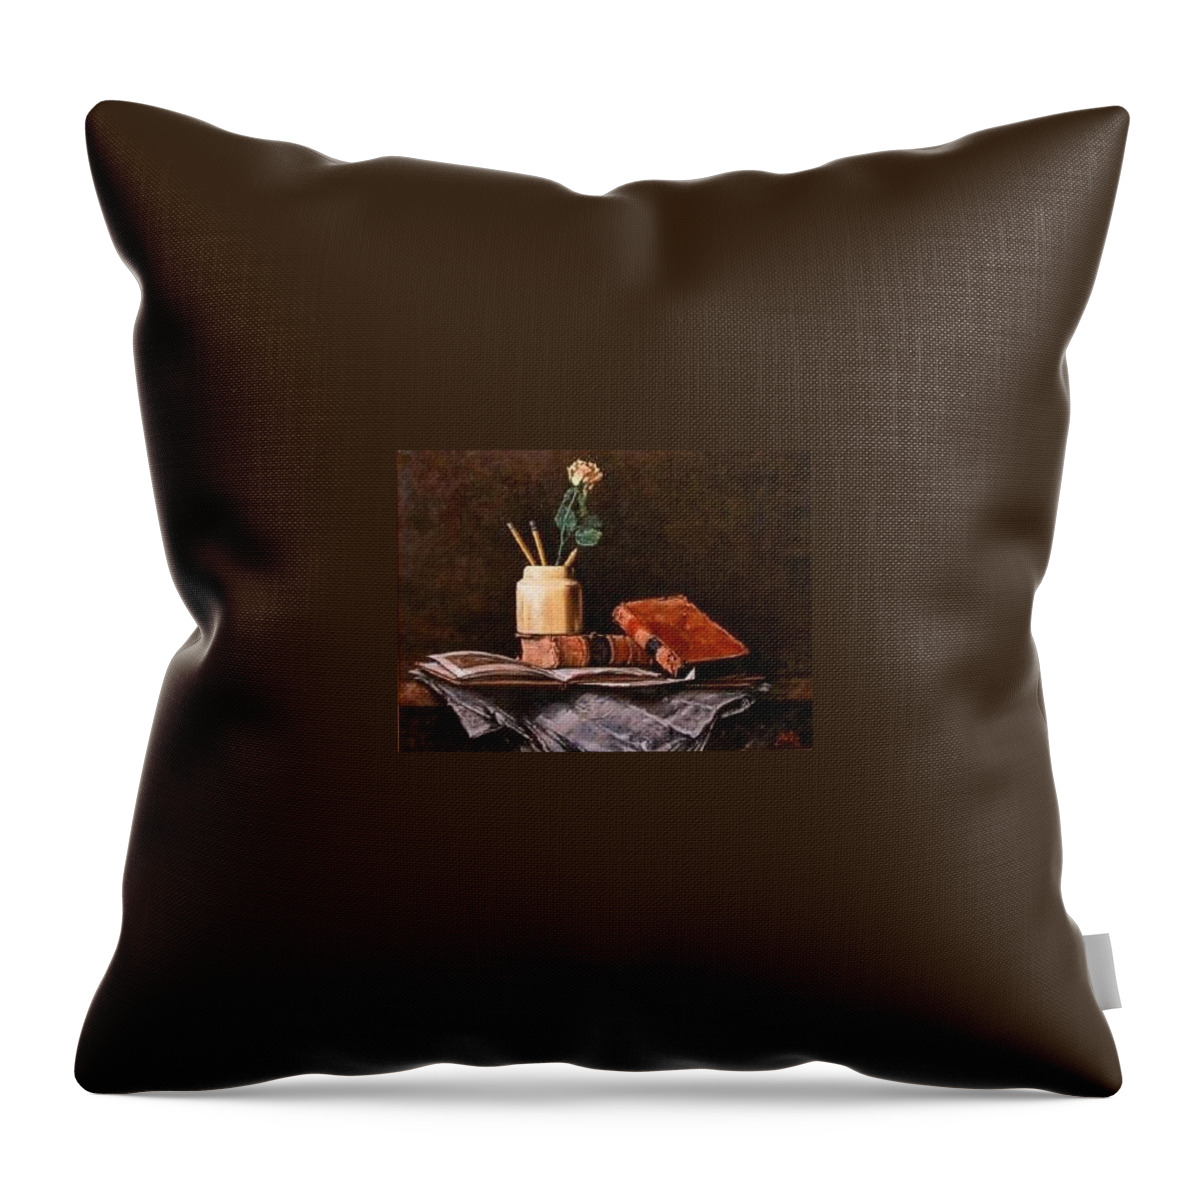 Still Life Throw Pillow featuring the painting Old News by Jim Gola